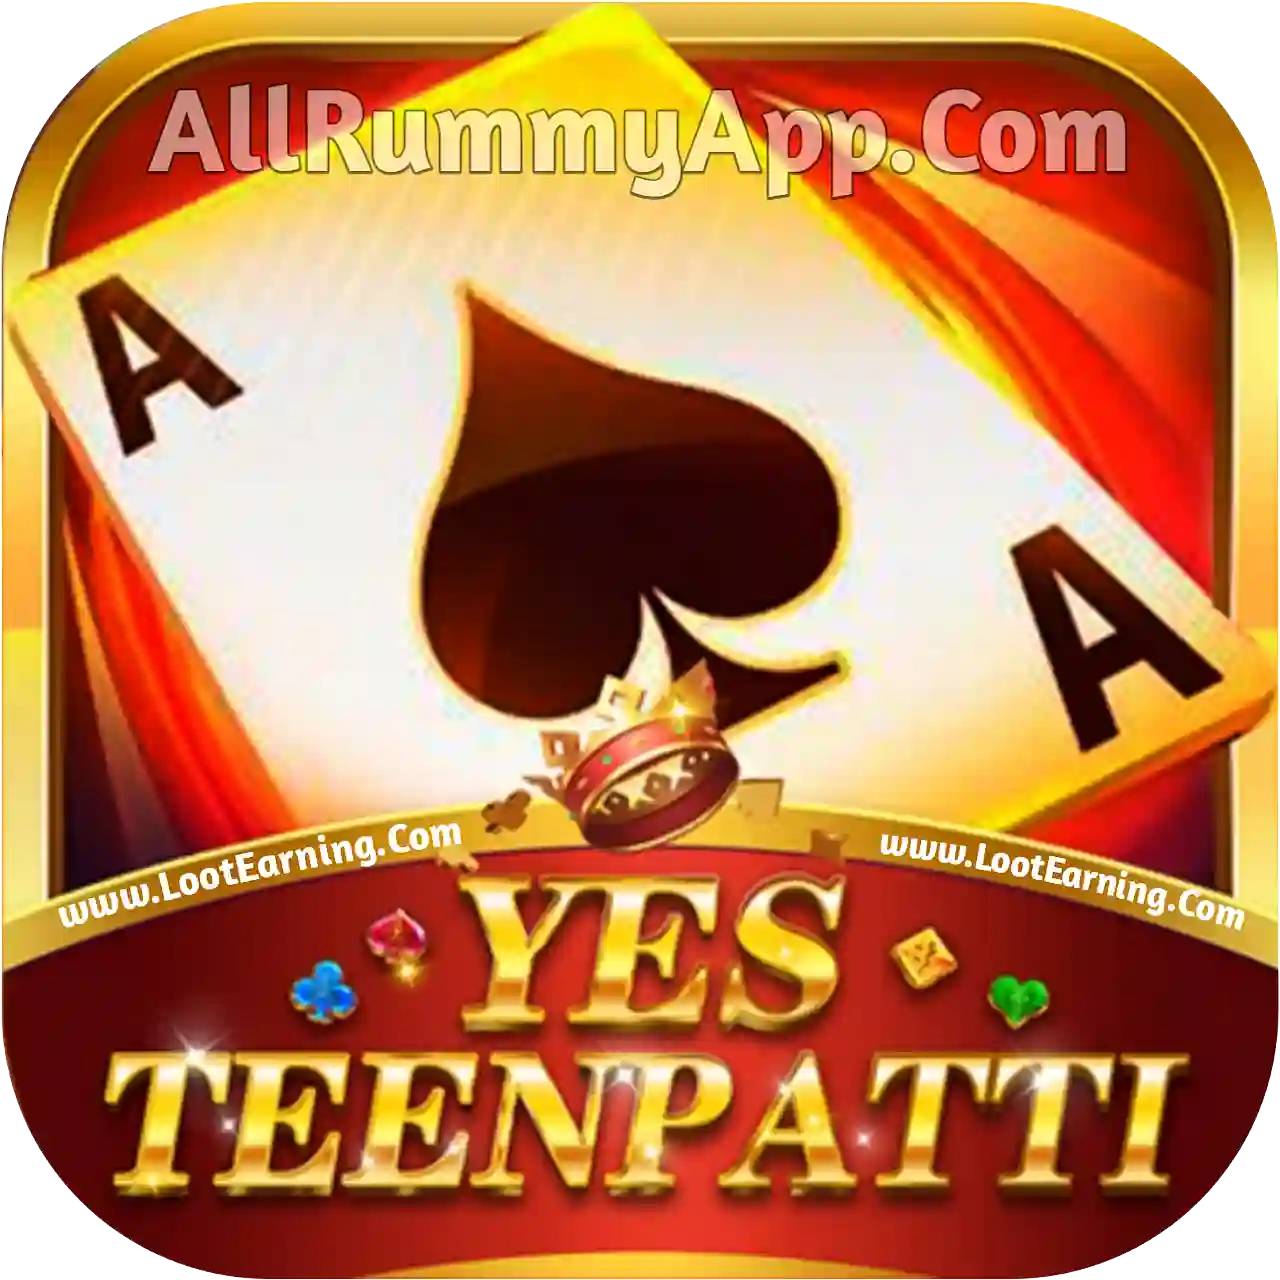 Teen Patti Yes - Rummy Golds